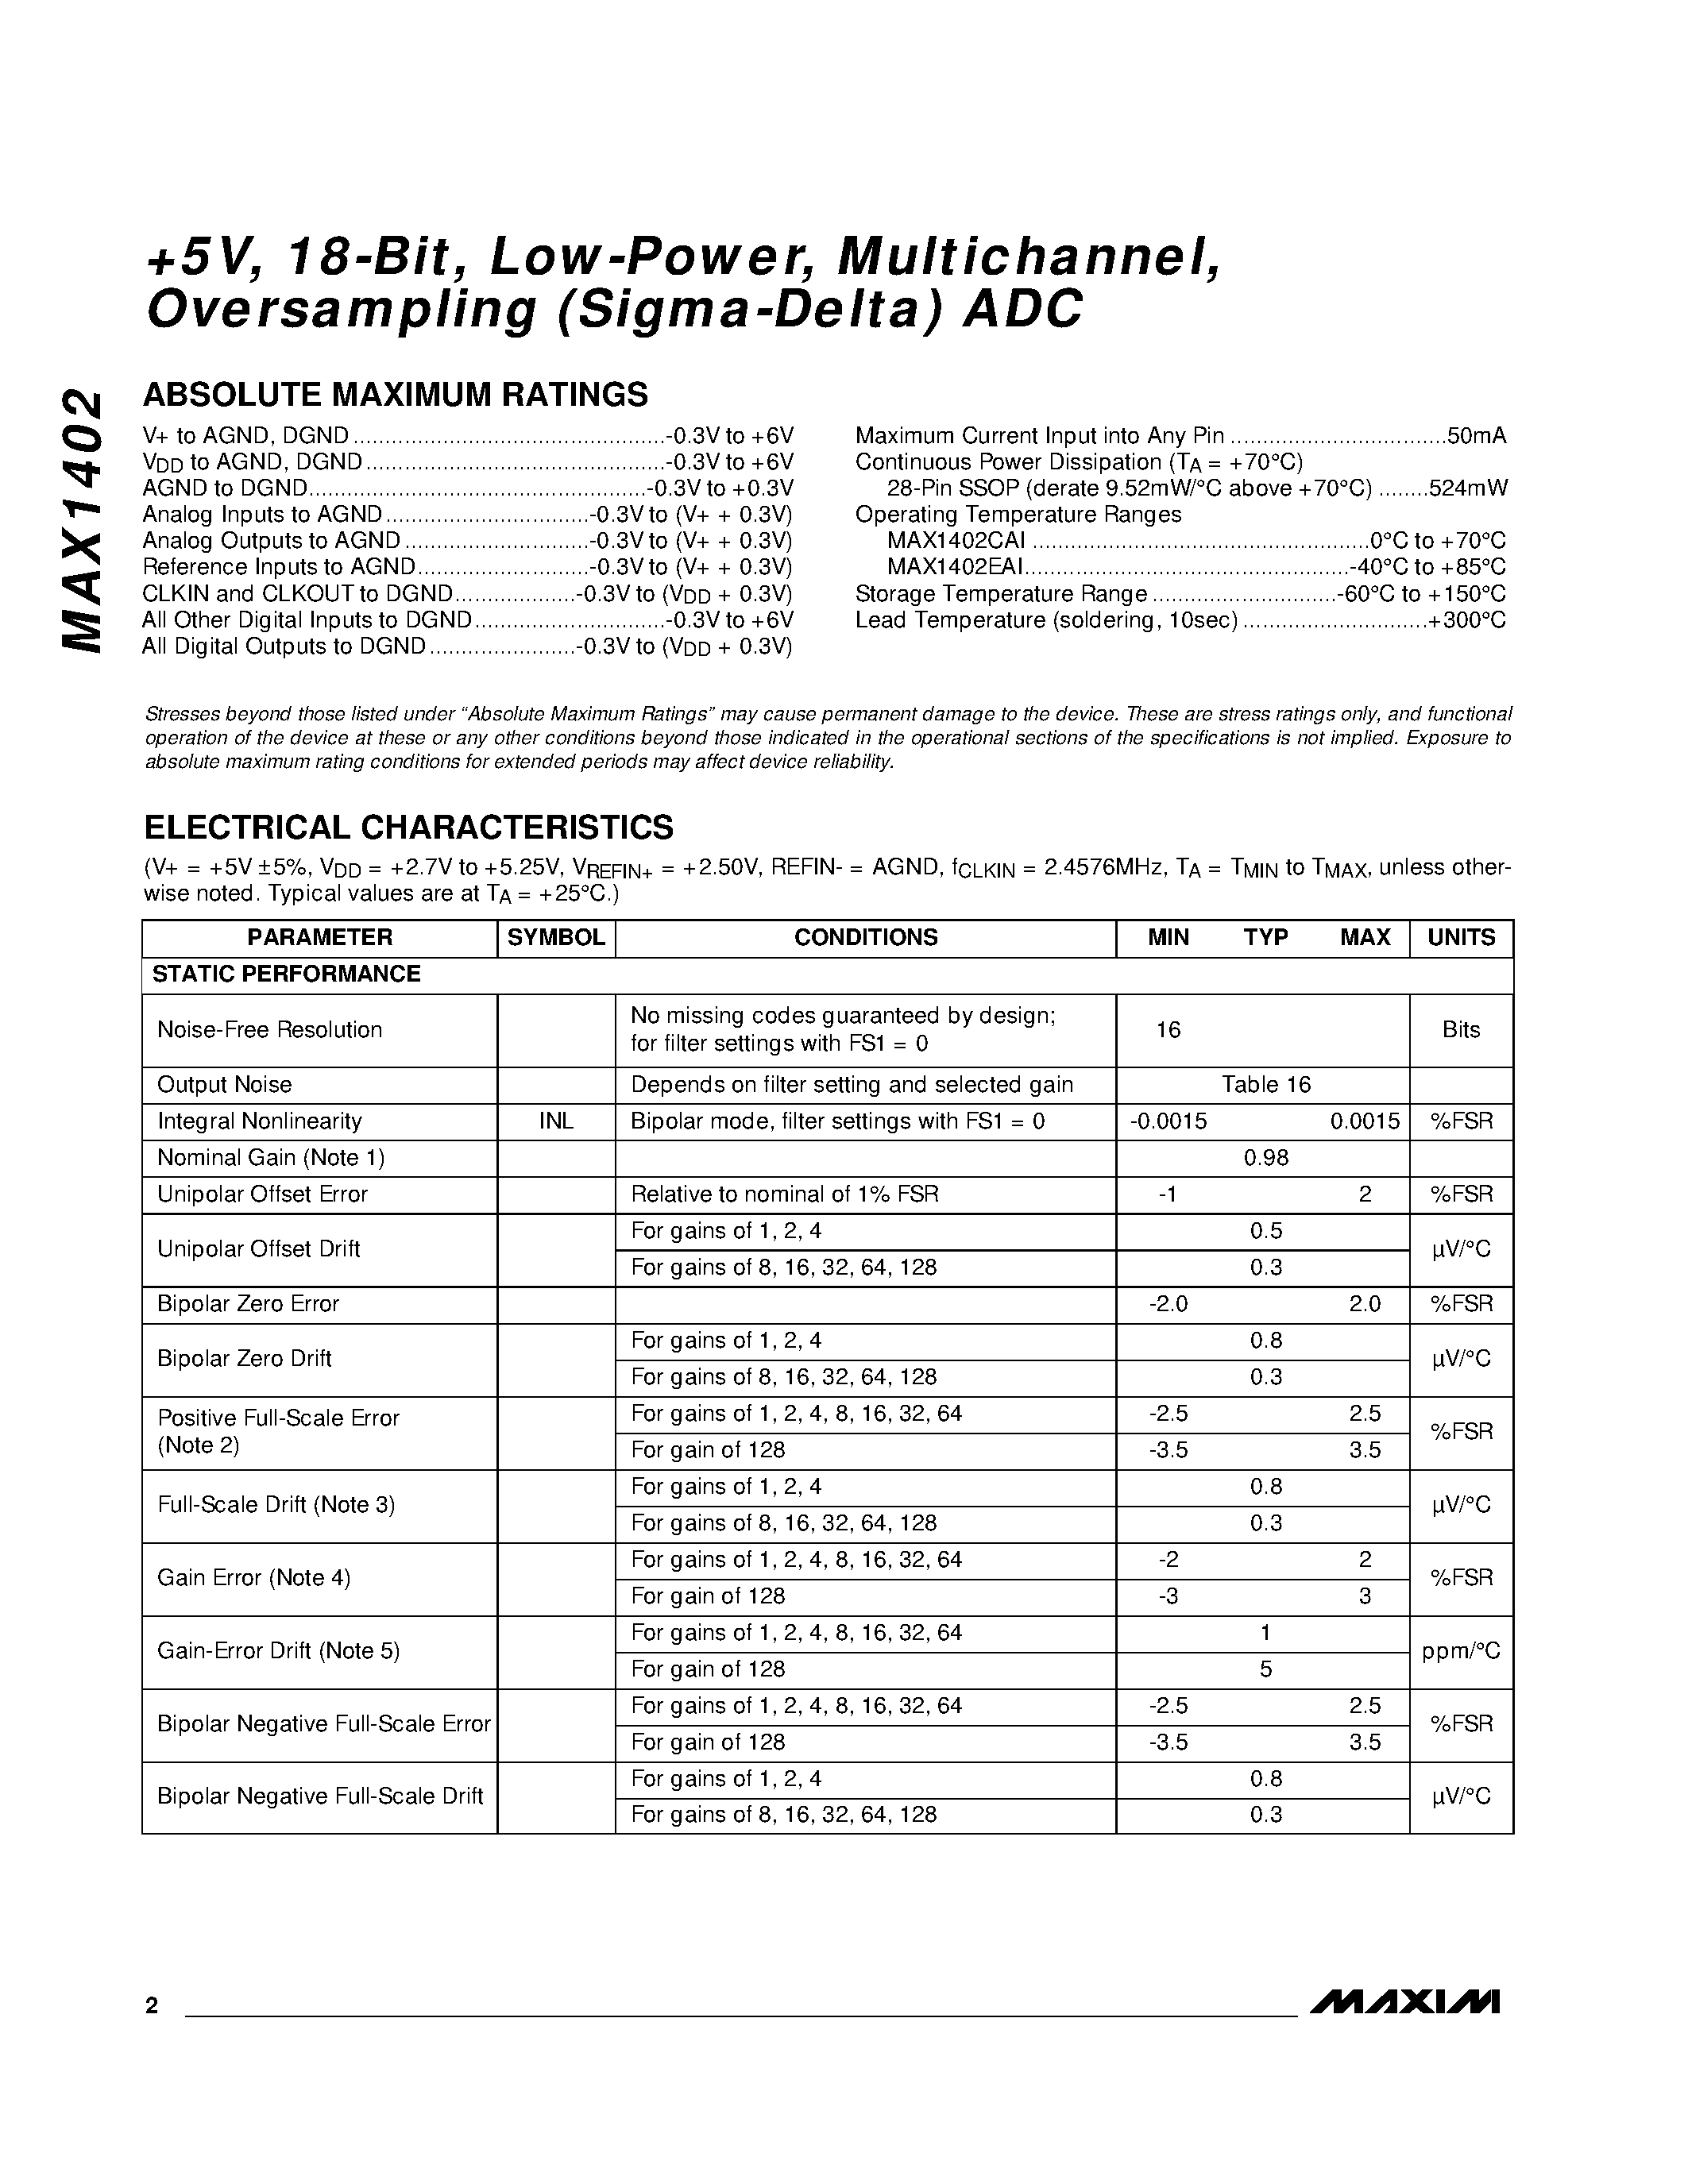 Datasheet MAX1402CAI - +5V / 18-Bit / Low-Power / Multichannel / Oversampling Sigma-Delta ADC page 2